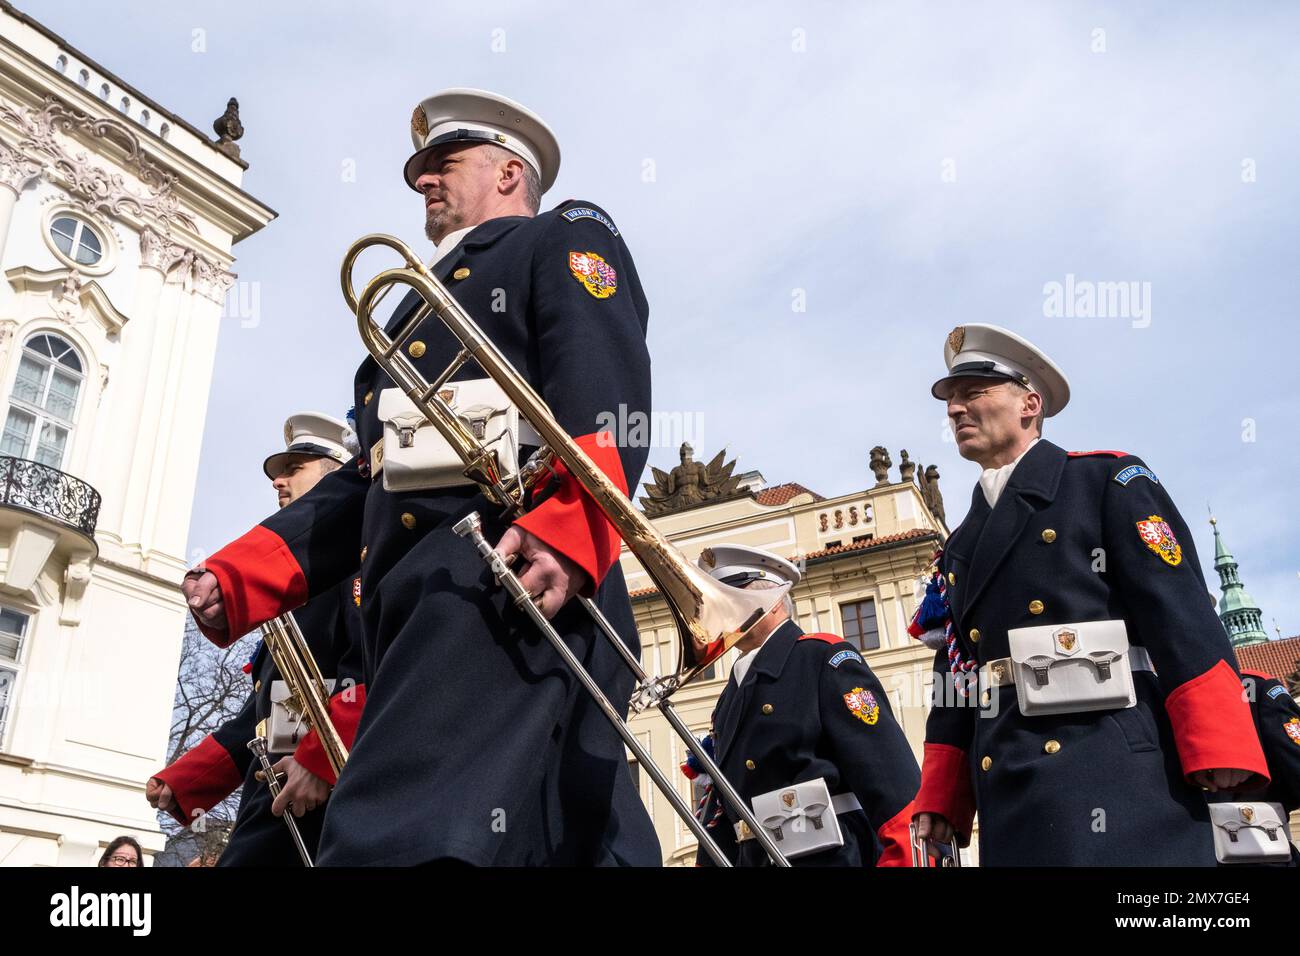 Czech military during a military parade in Prague, Capital of the Czech Republic Stock Photo